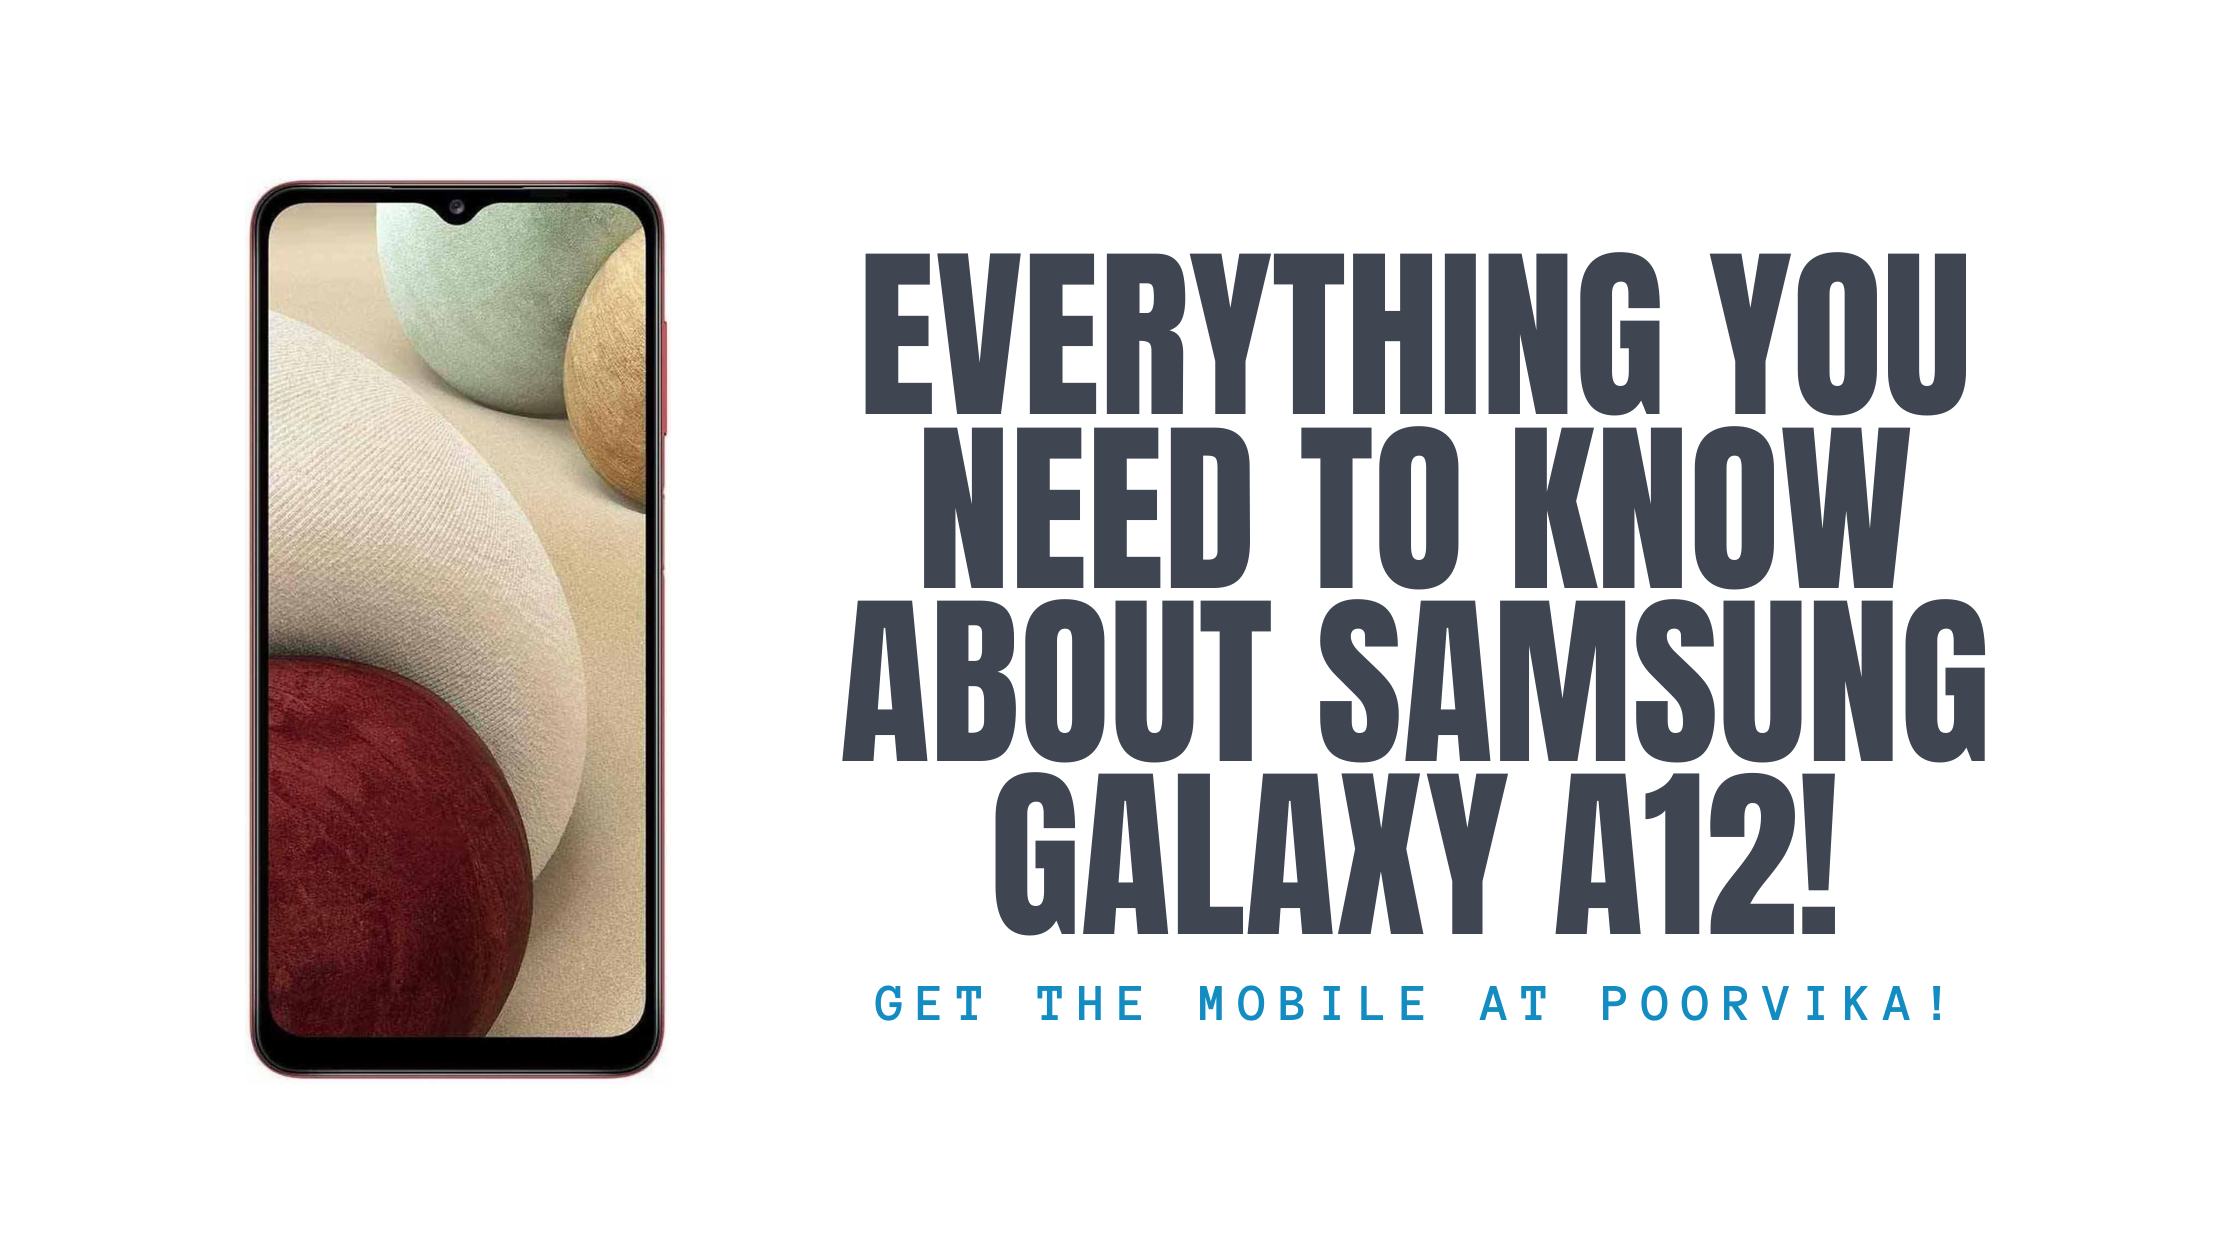 EVERYTHING YOU NEED TO KNOW ABOUT SAMSUNG GALAXY A12!